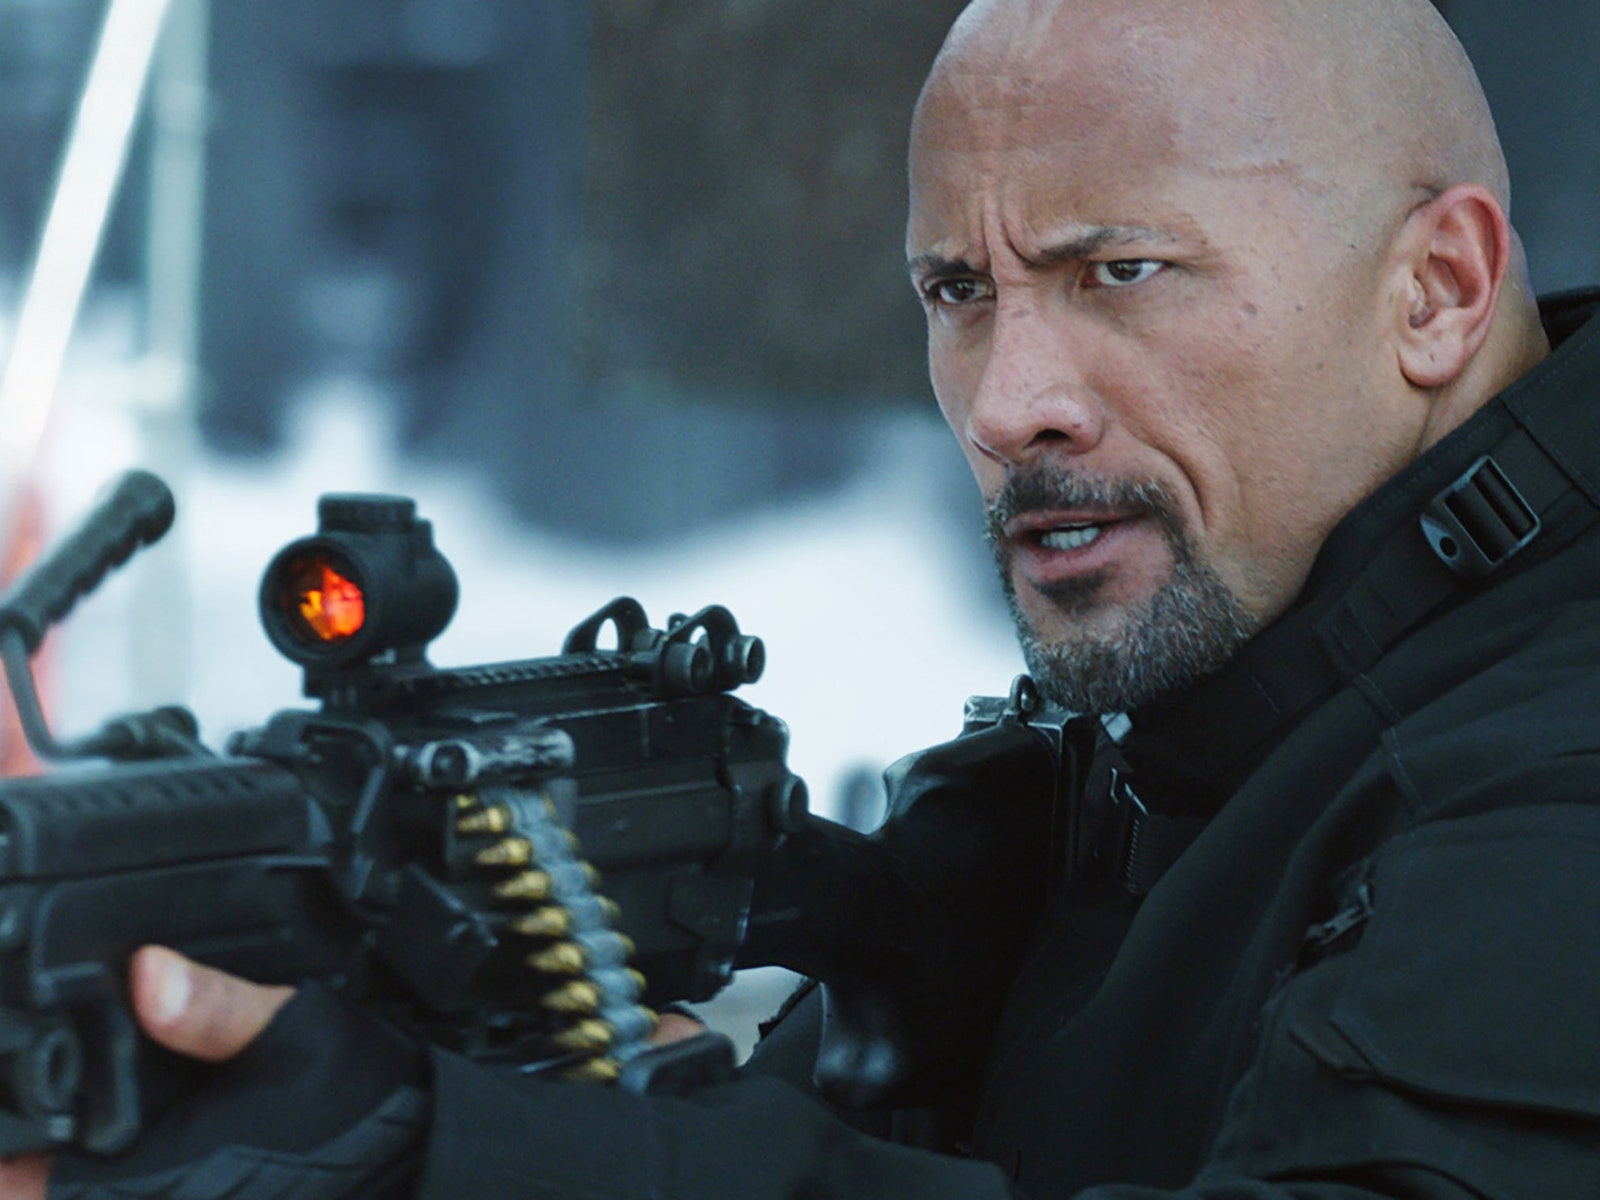 Dwayne Johnson Isn’t Just Returning to the Fast &amp; Furious Franchise, He’s Getting His Own Spinoff